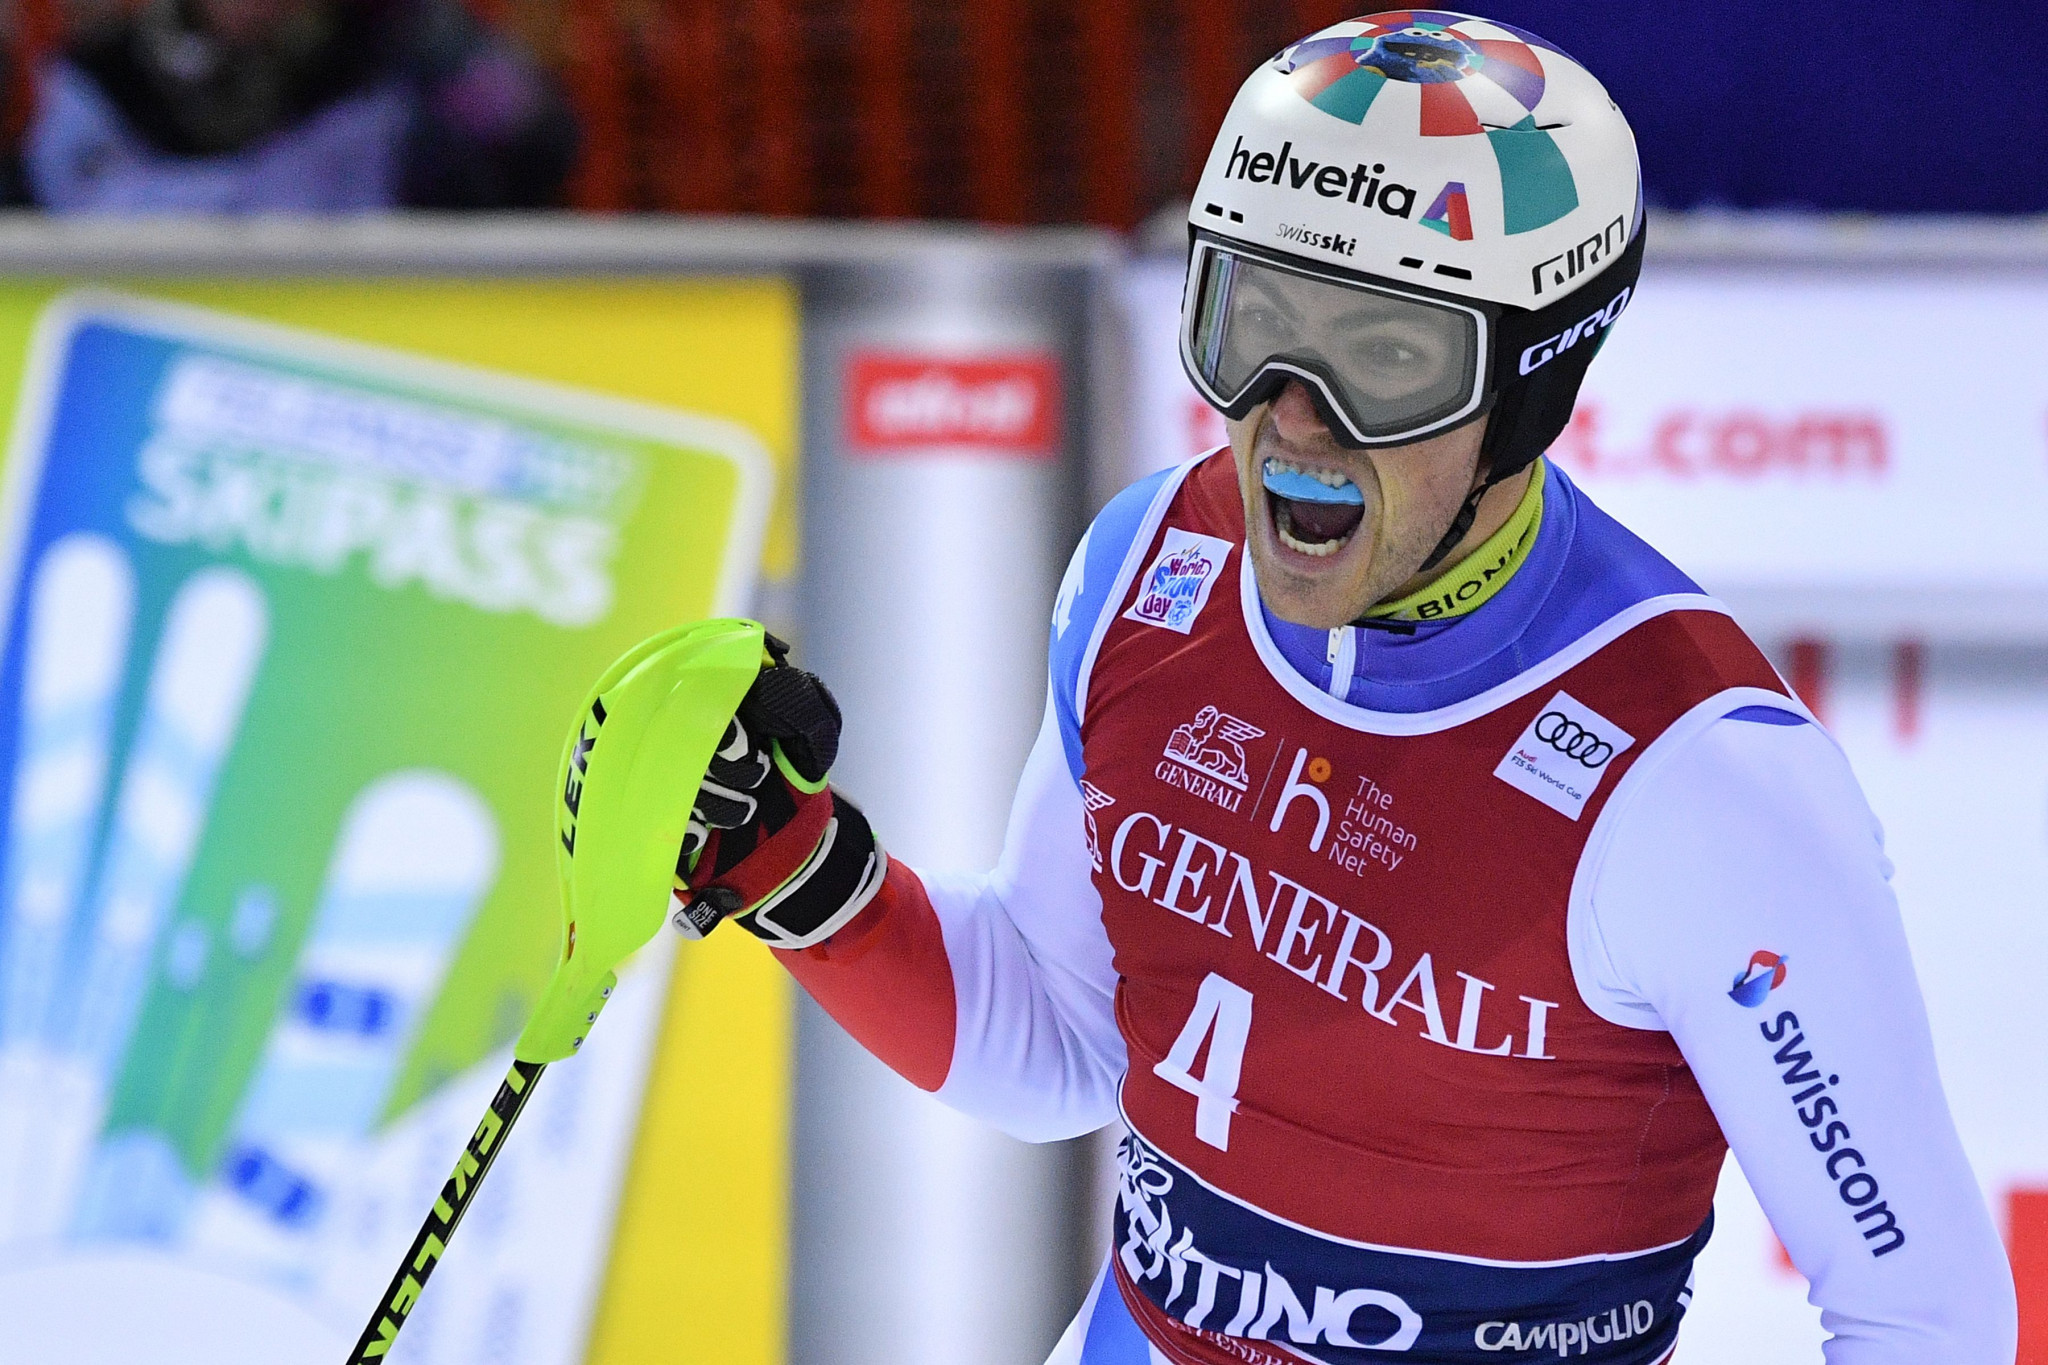 Yule wins men's slalom for second year in row at FIS Alpine Skiing World Cup in Madonna di Campiglio